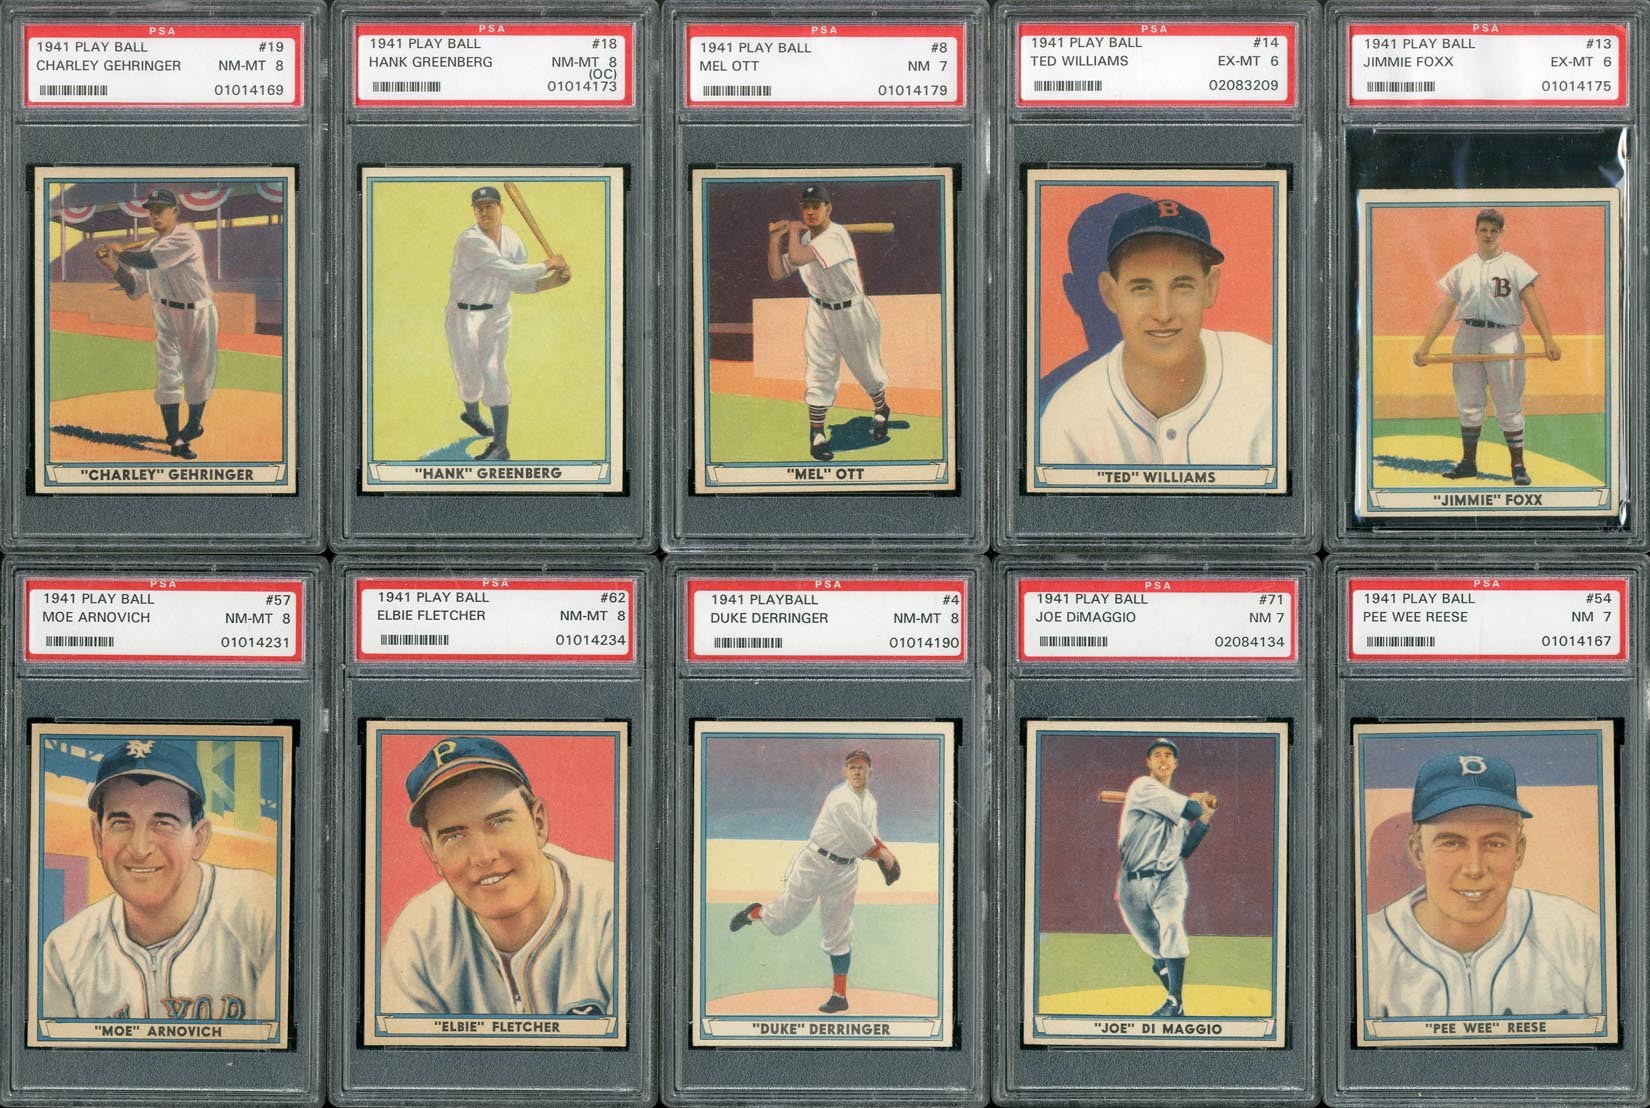 Baseball and Trading Cards - High Grade 1941 Play Ball PSA Graded Complete Set - #11 on PSA Registry (6.53 GPA)